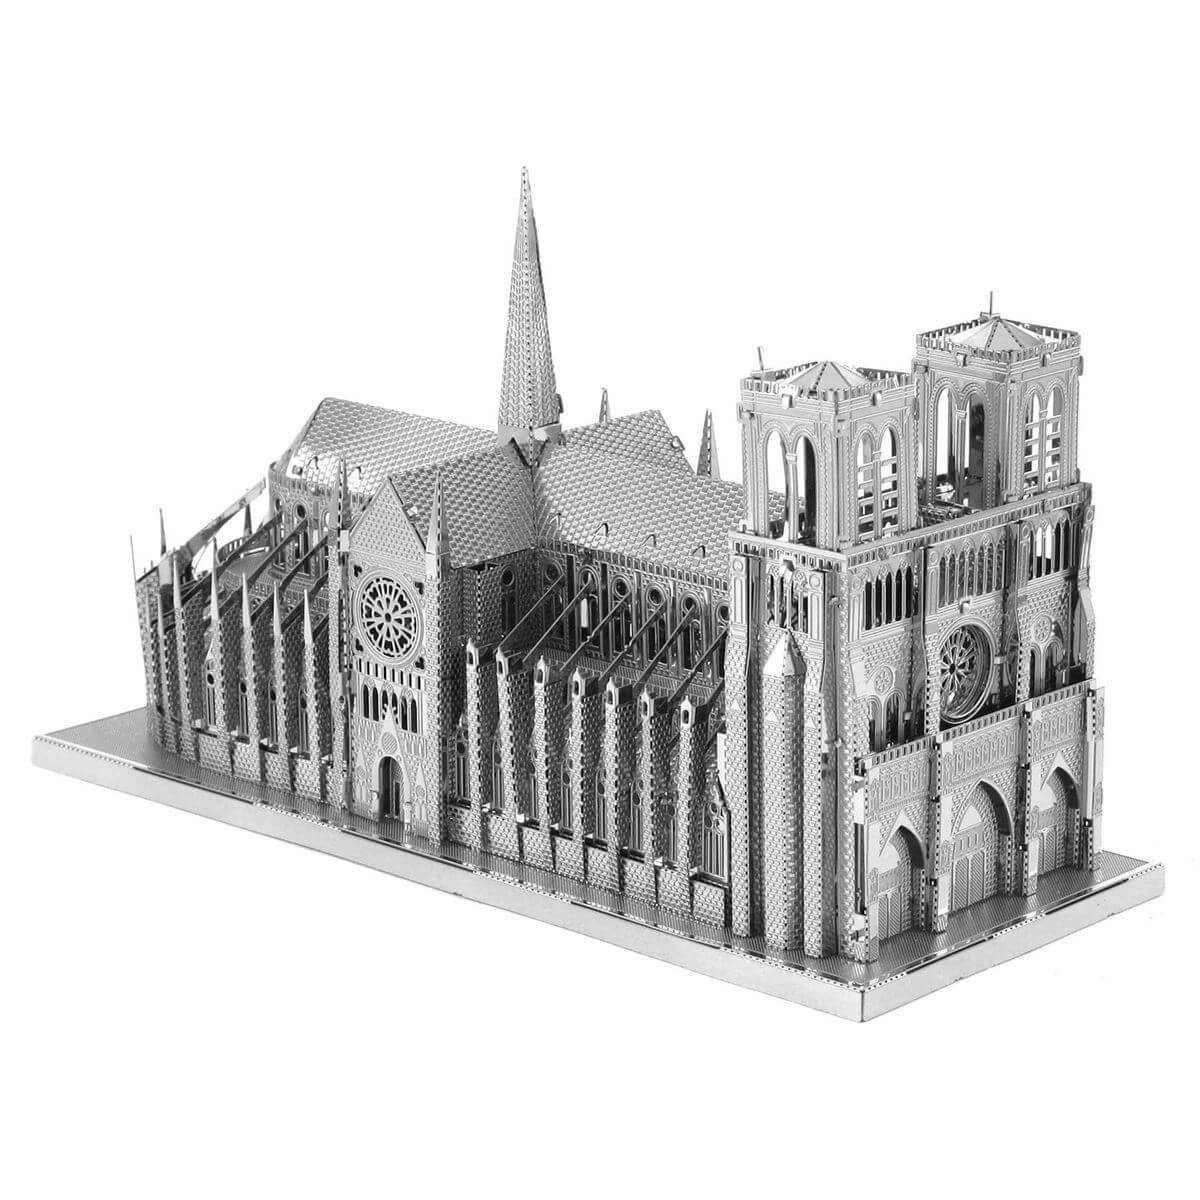 Side view of the metal Notre Dame.